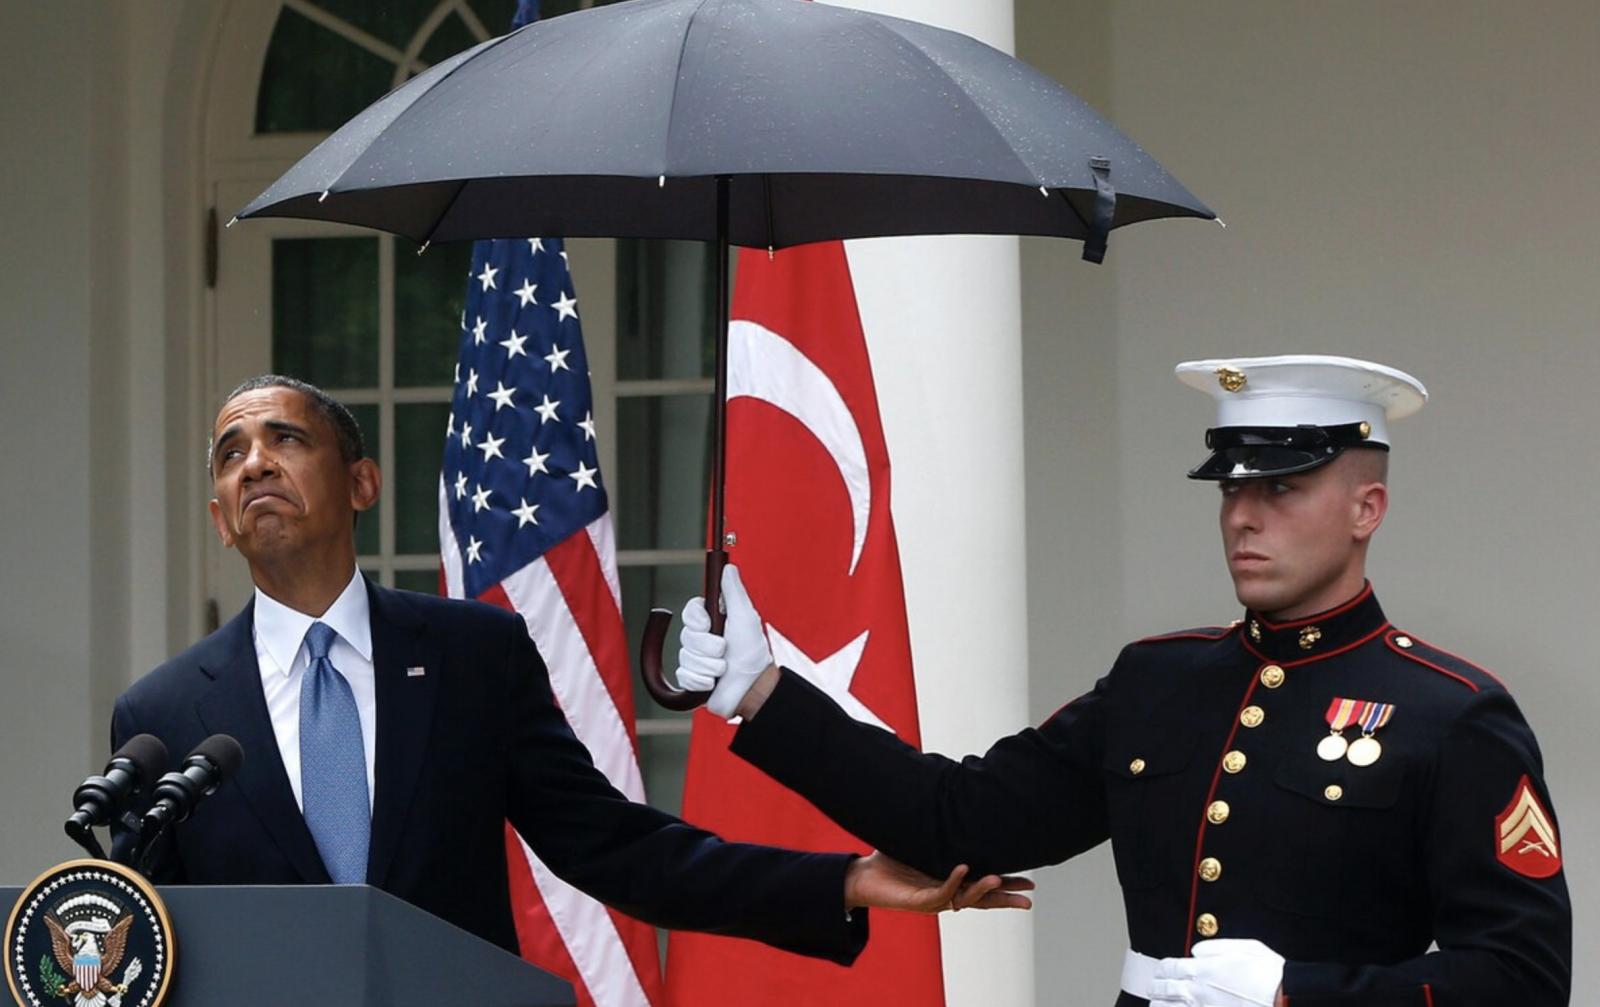  Umbrellas for male Marines, silver earrings for female Marines: Corps makes uniform changes